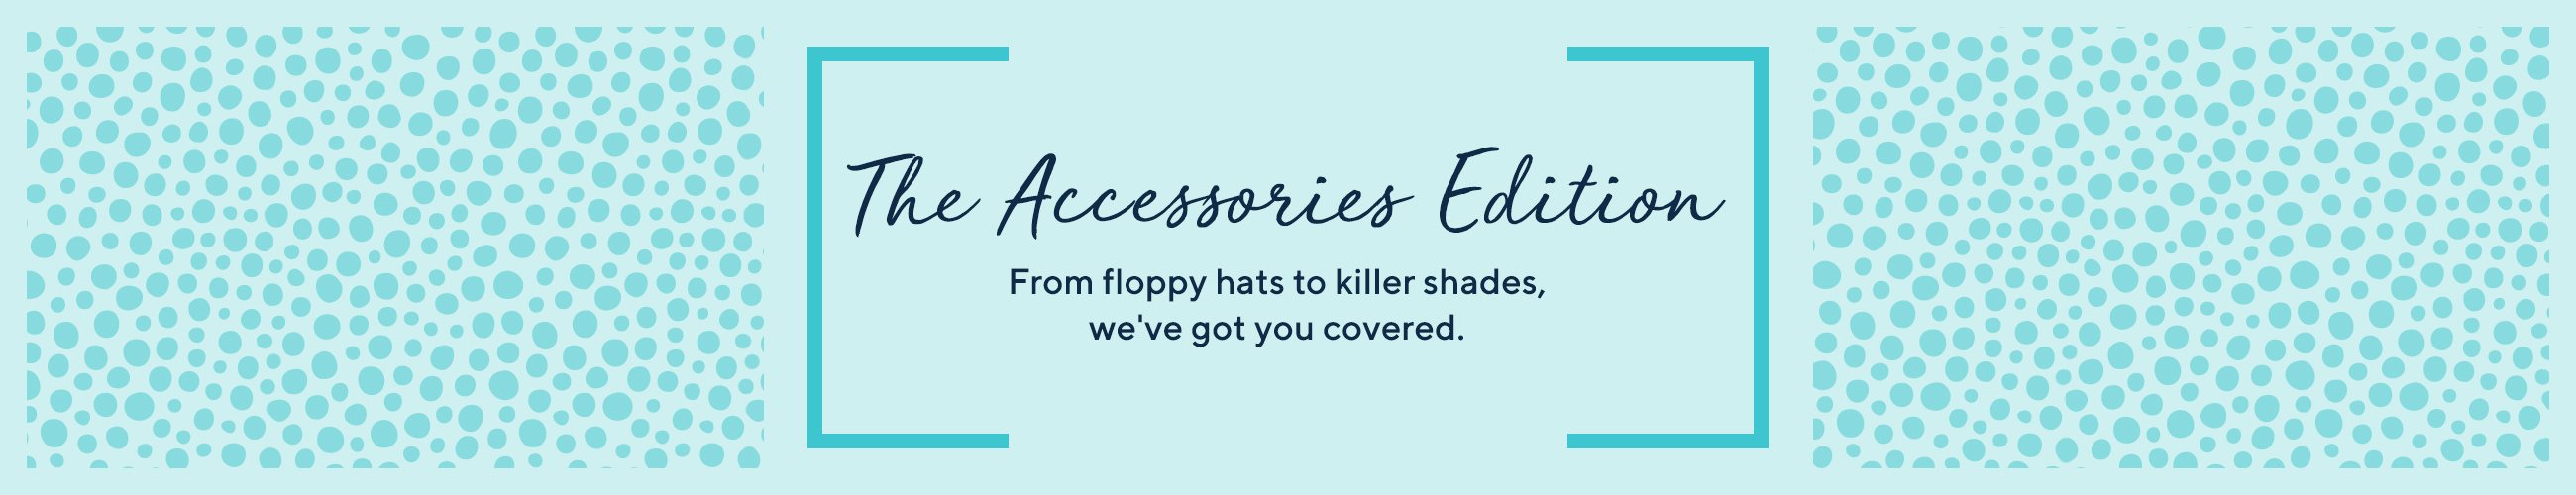 The Accessories Edition From floppy hats to killer shades, we've got you covered.